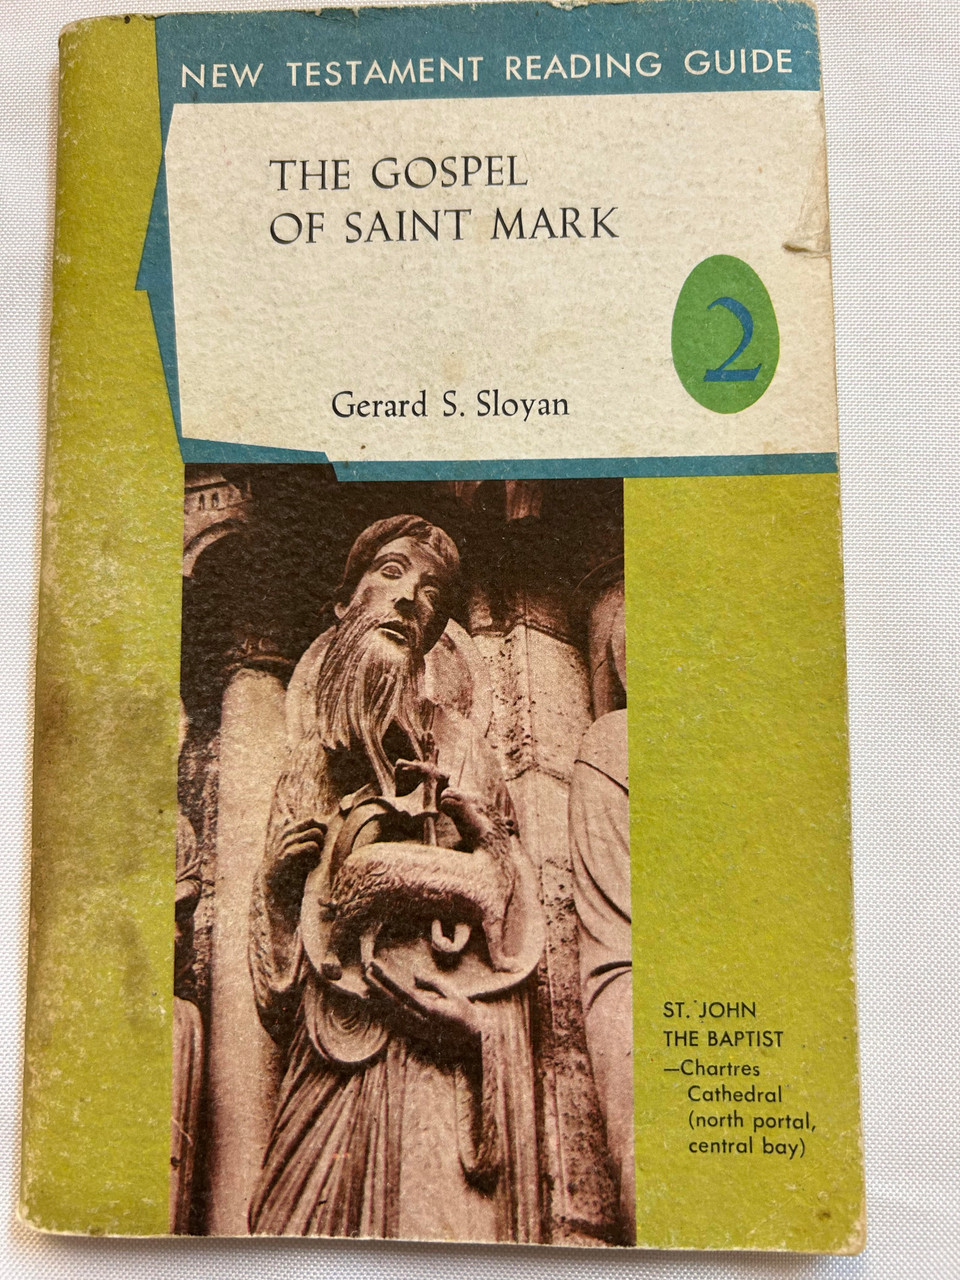 A reading guide for the Gospel of Saint Mark. 

Published by Liturgical press.

This is a used book and is sold as is. It may contain markings from previous readers and have some signs of previous use.